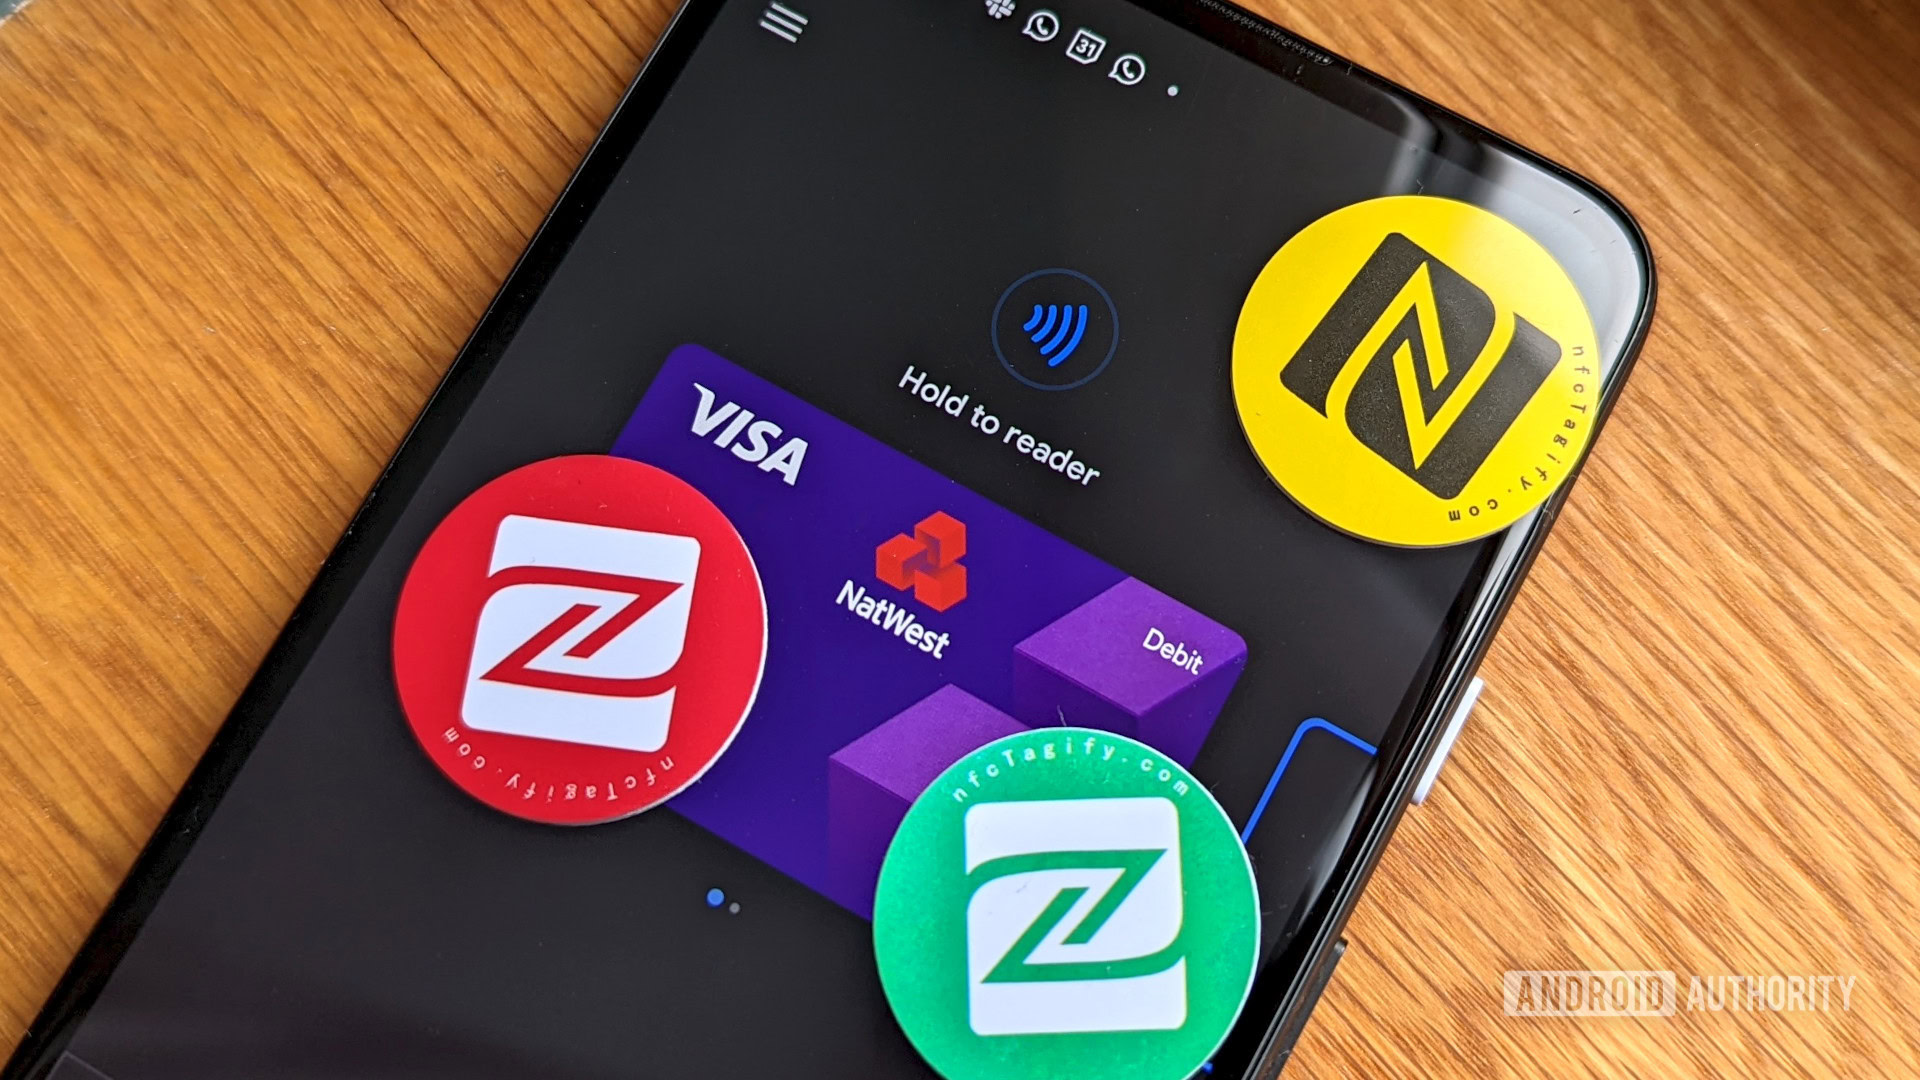 What are NFC tags and readers? How do they work? - Android Authority